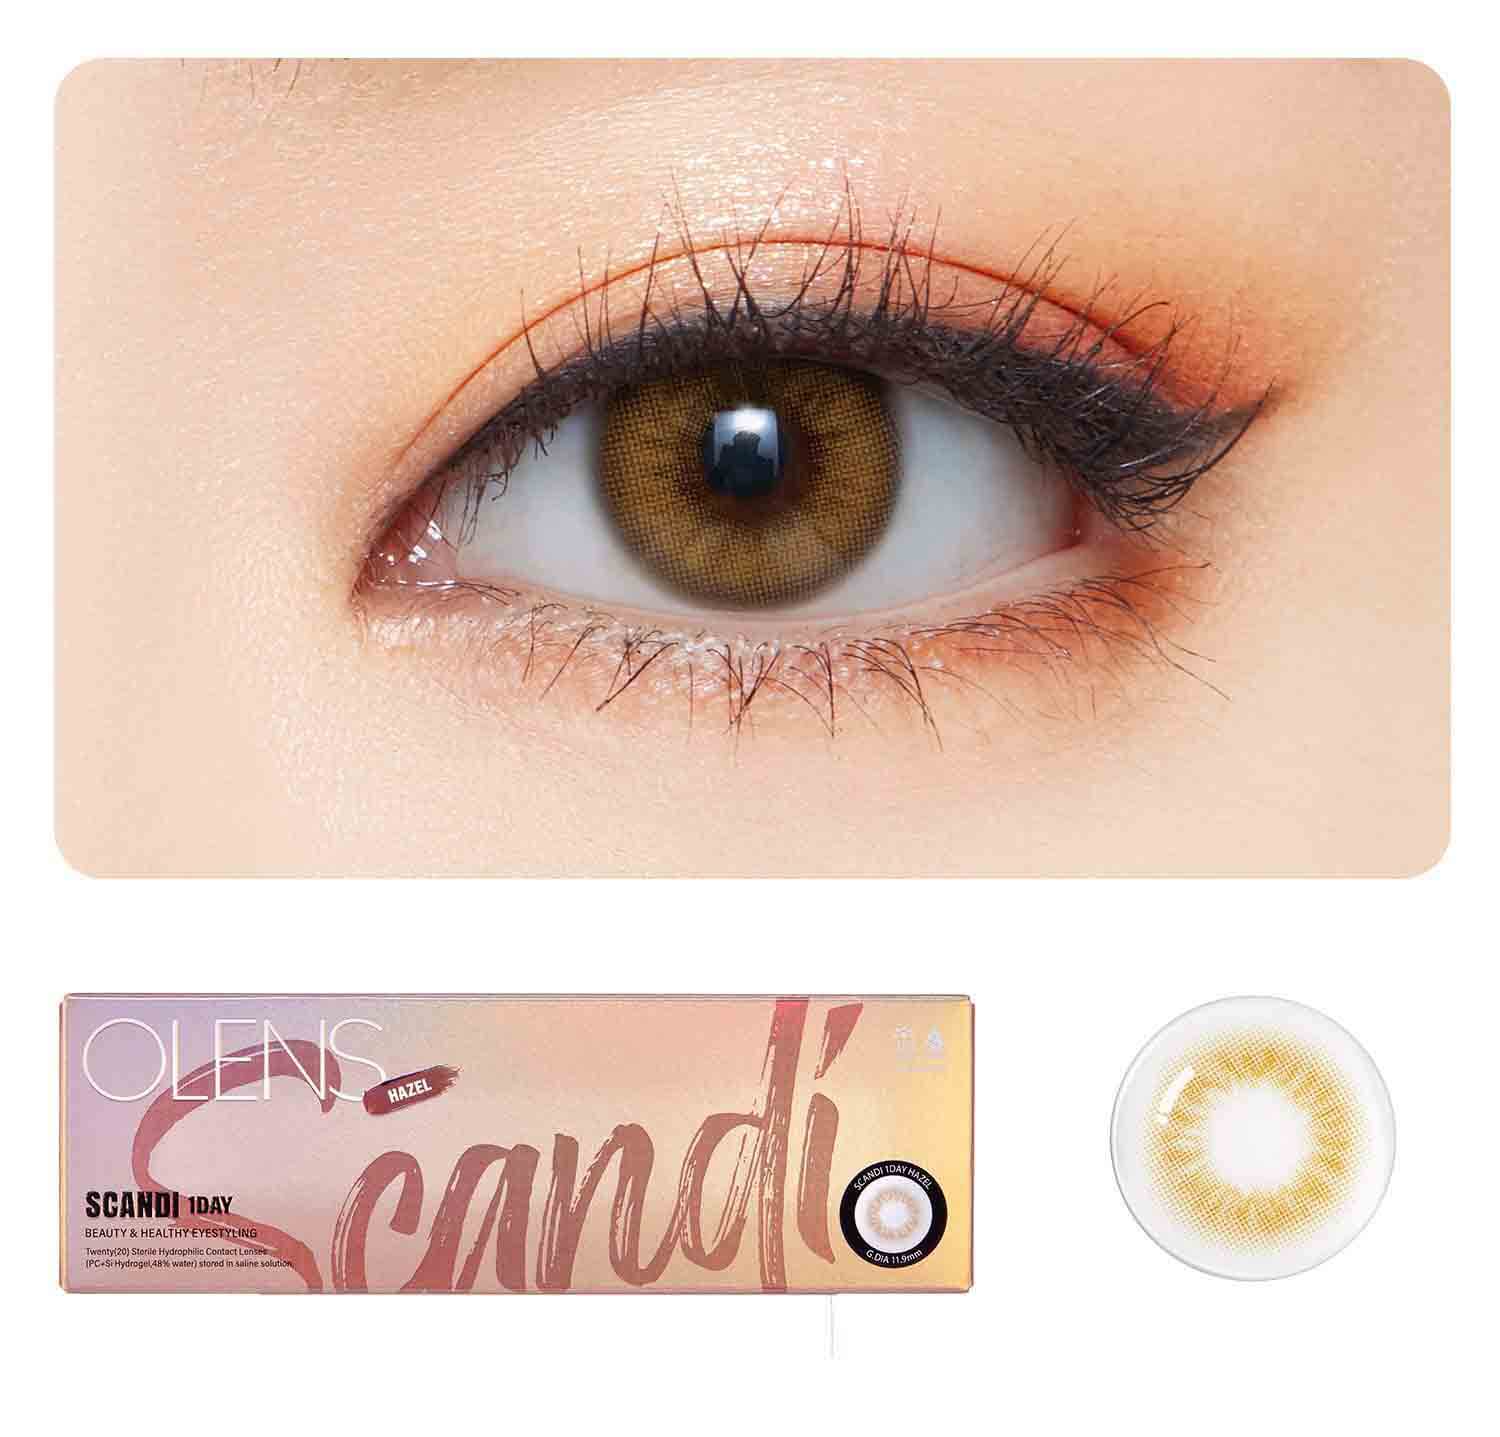 OLENS Premium Color Contact Lens Scandi 1 day color contact lens | Premium soft & breathable material at affordable price | o-lens.co.in.